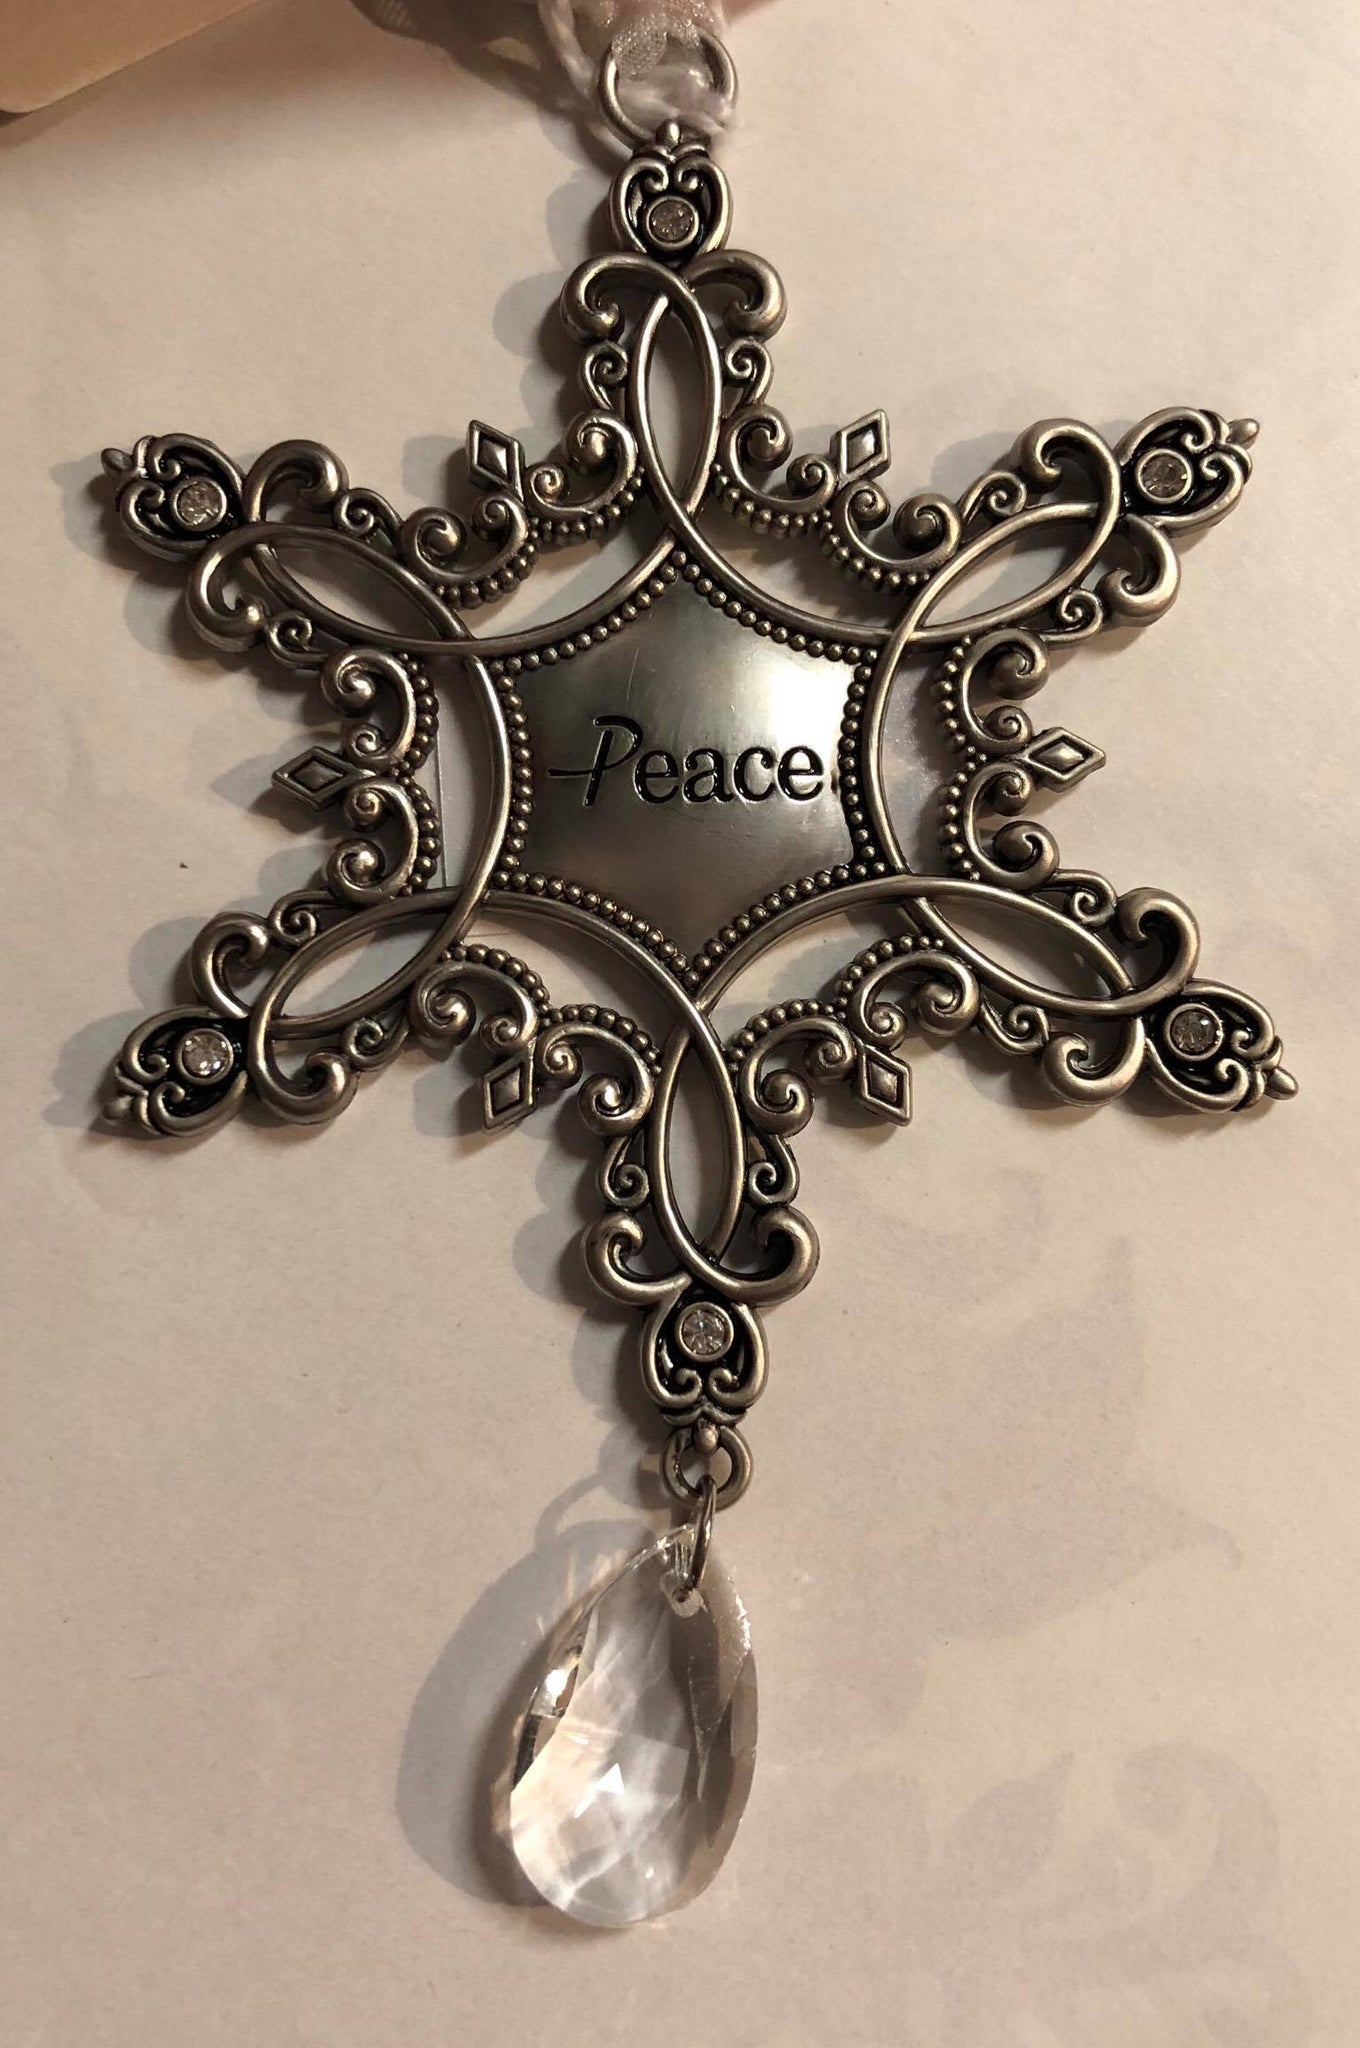 Snowflake Tree Ornament with Hanging Charm "Peace"